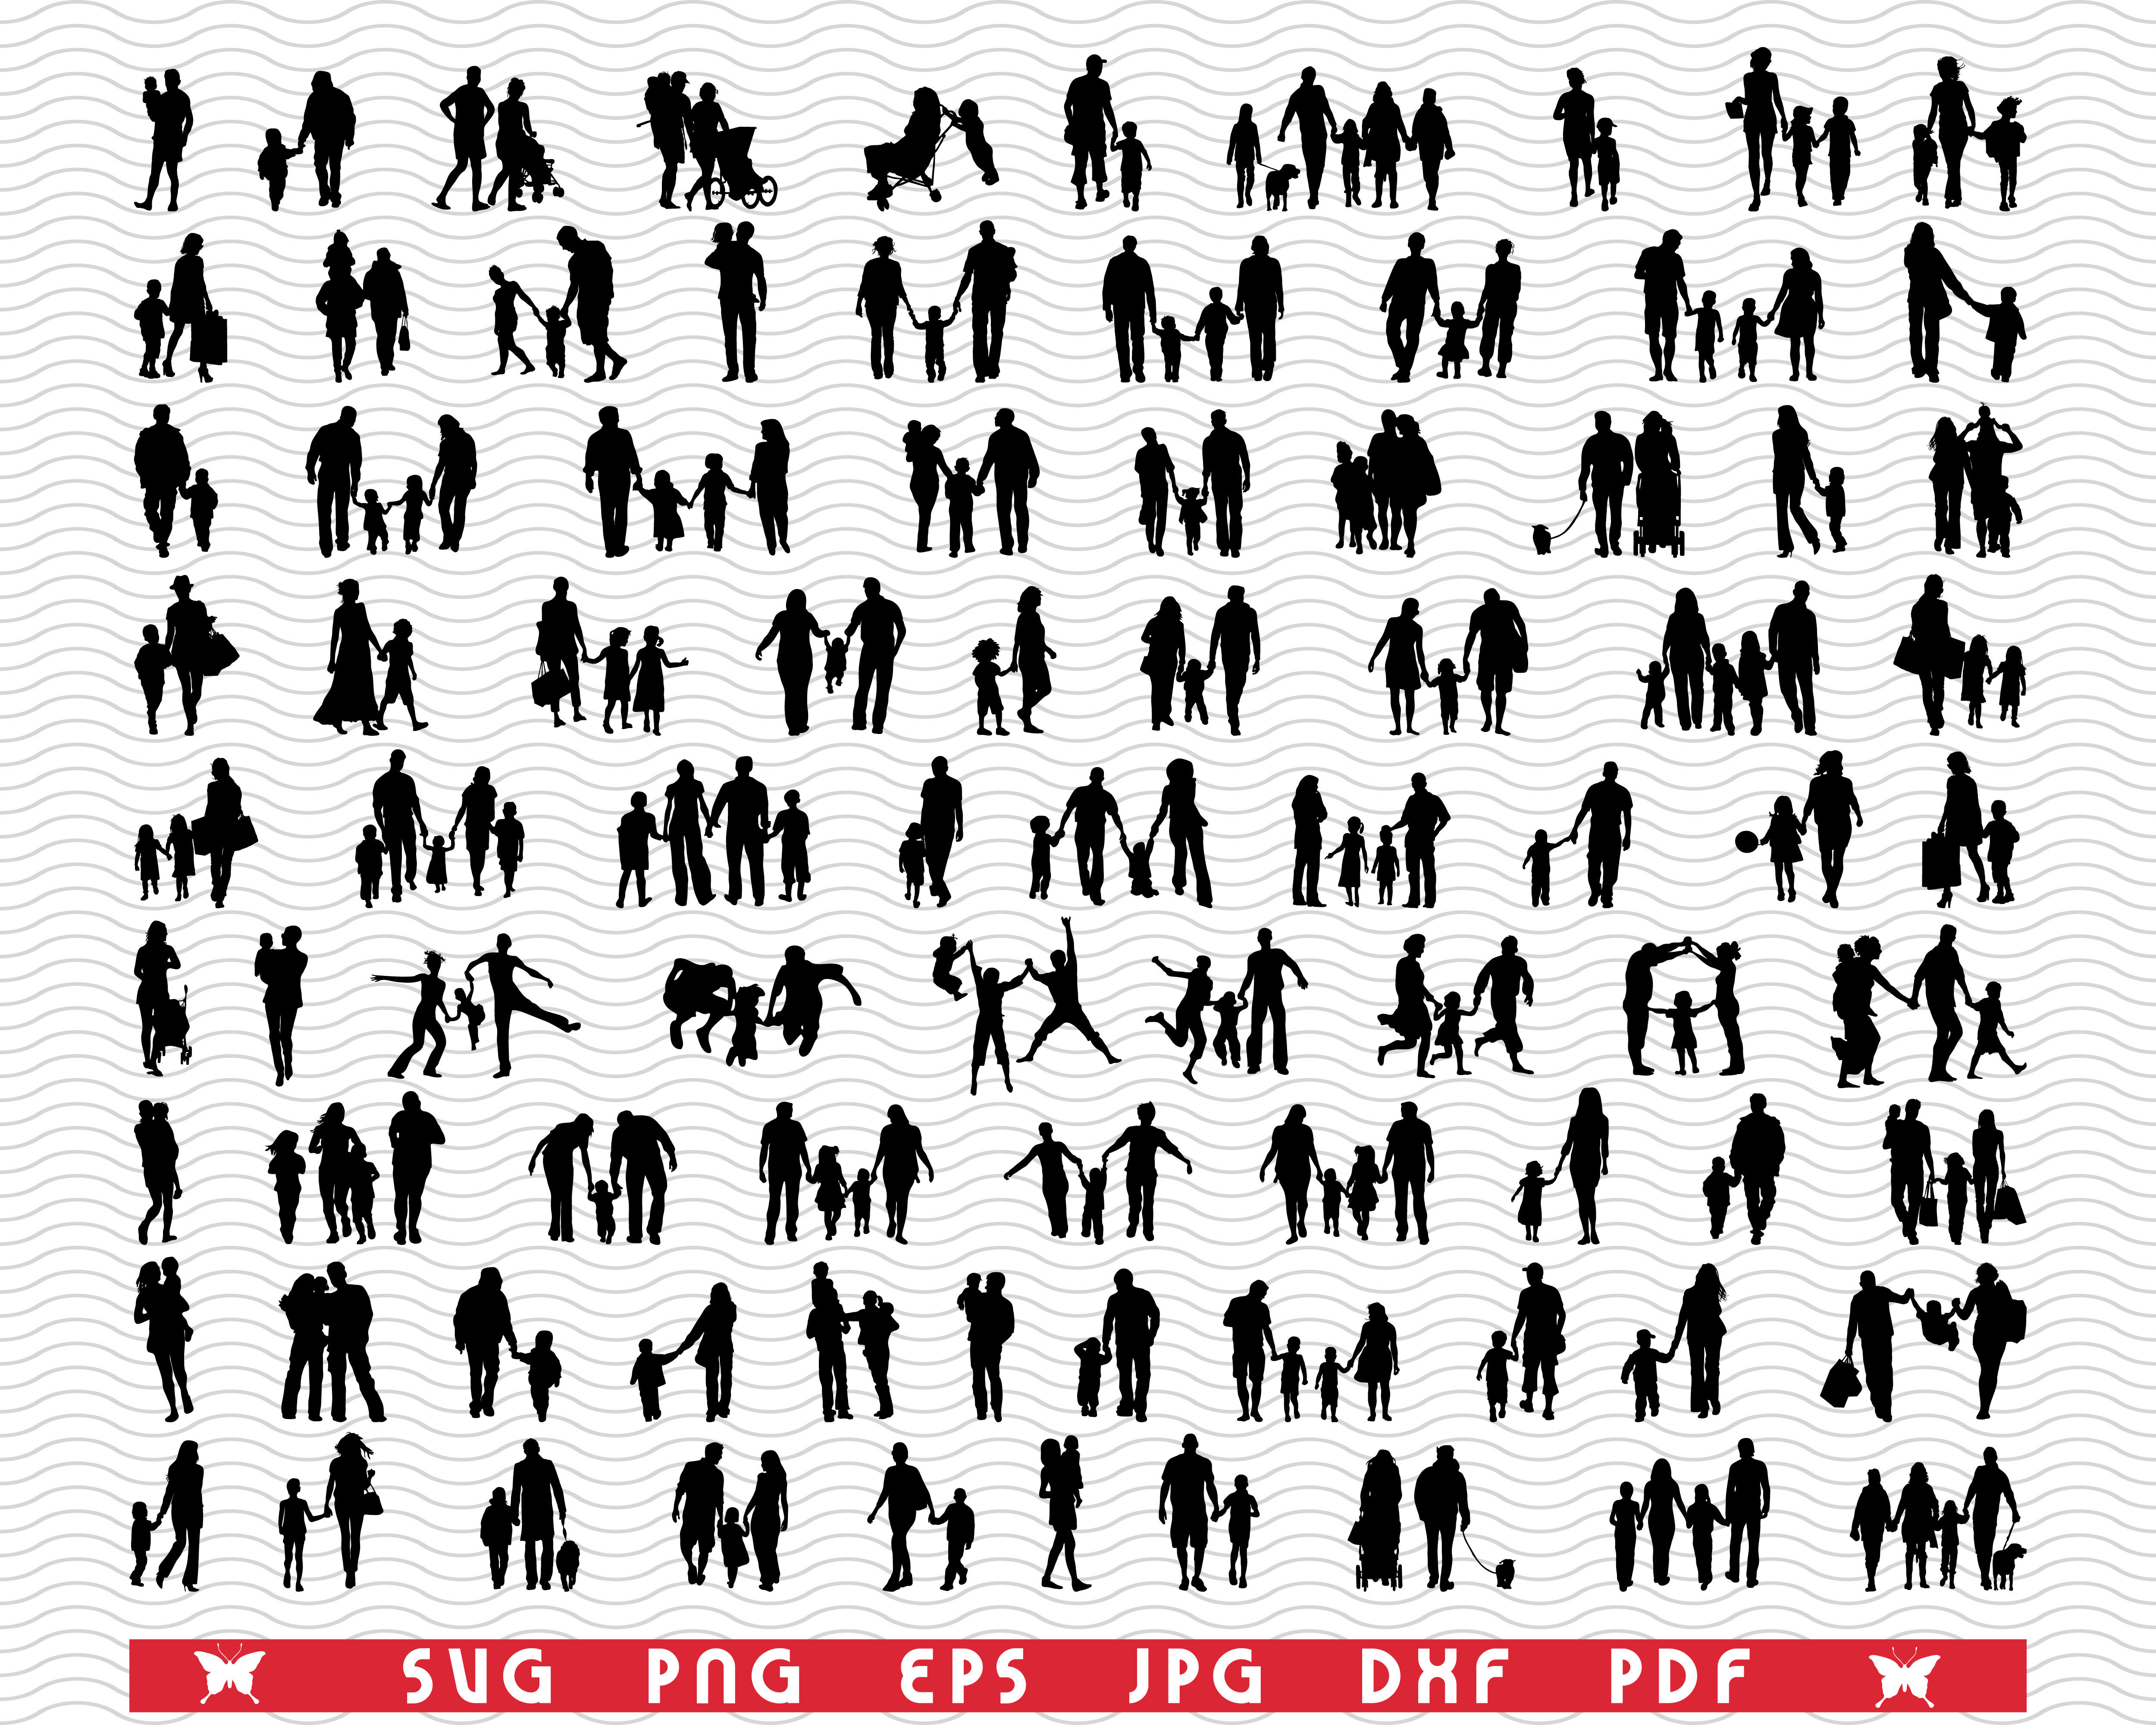 Download Svg Families In Walk Silhouettes Digital Clipart By Designstudiorm Thehungryjpeg Com